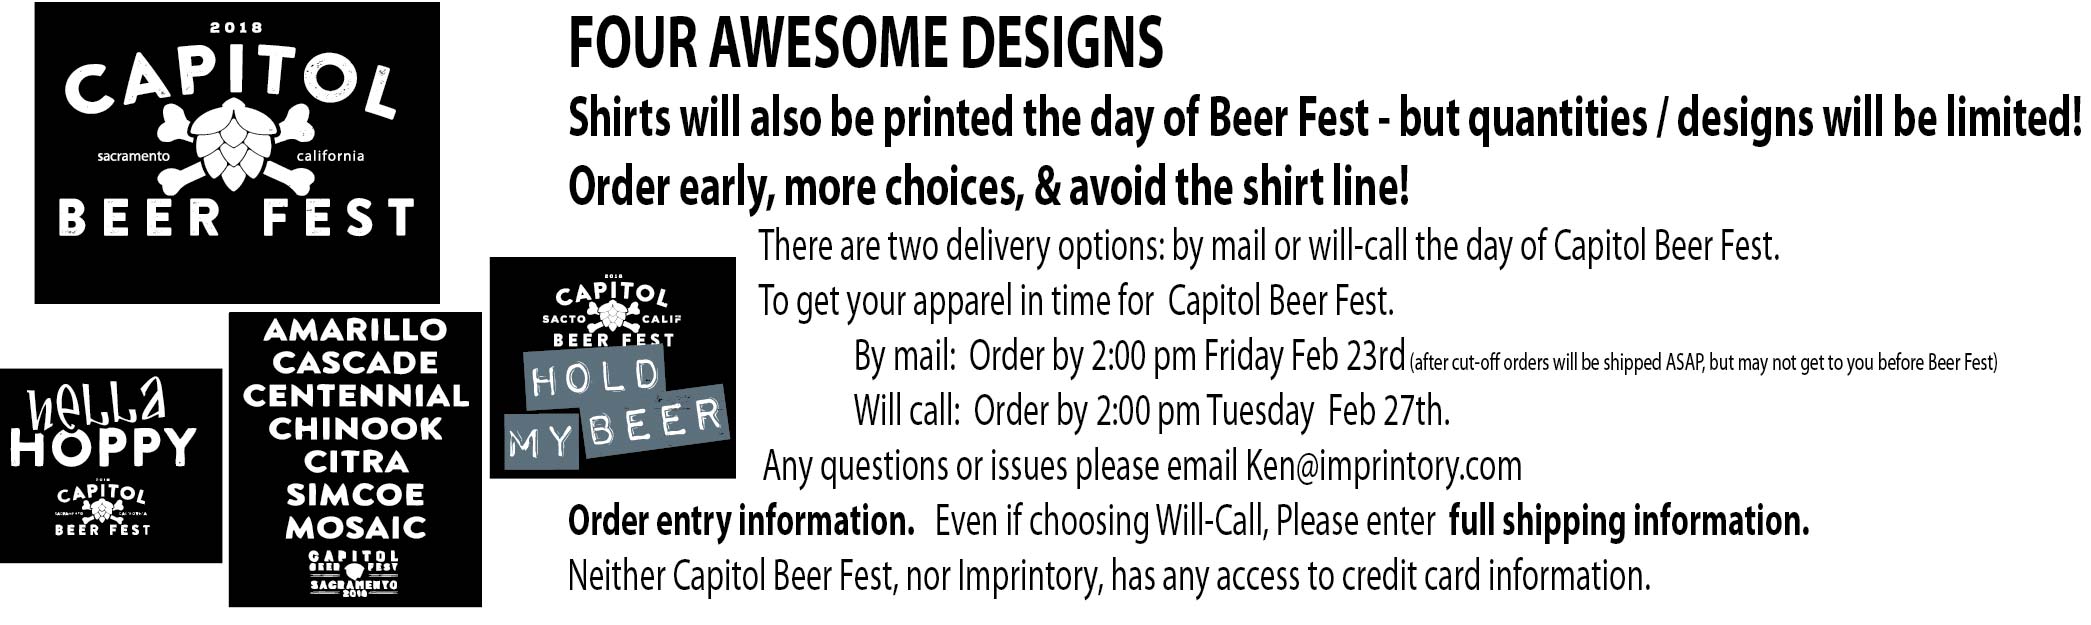 images/Capitol Beer Fest Group.gif